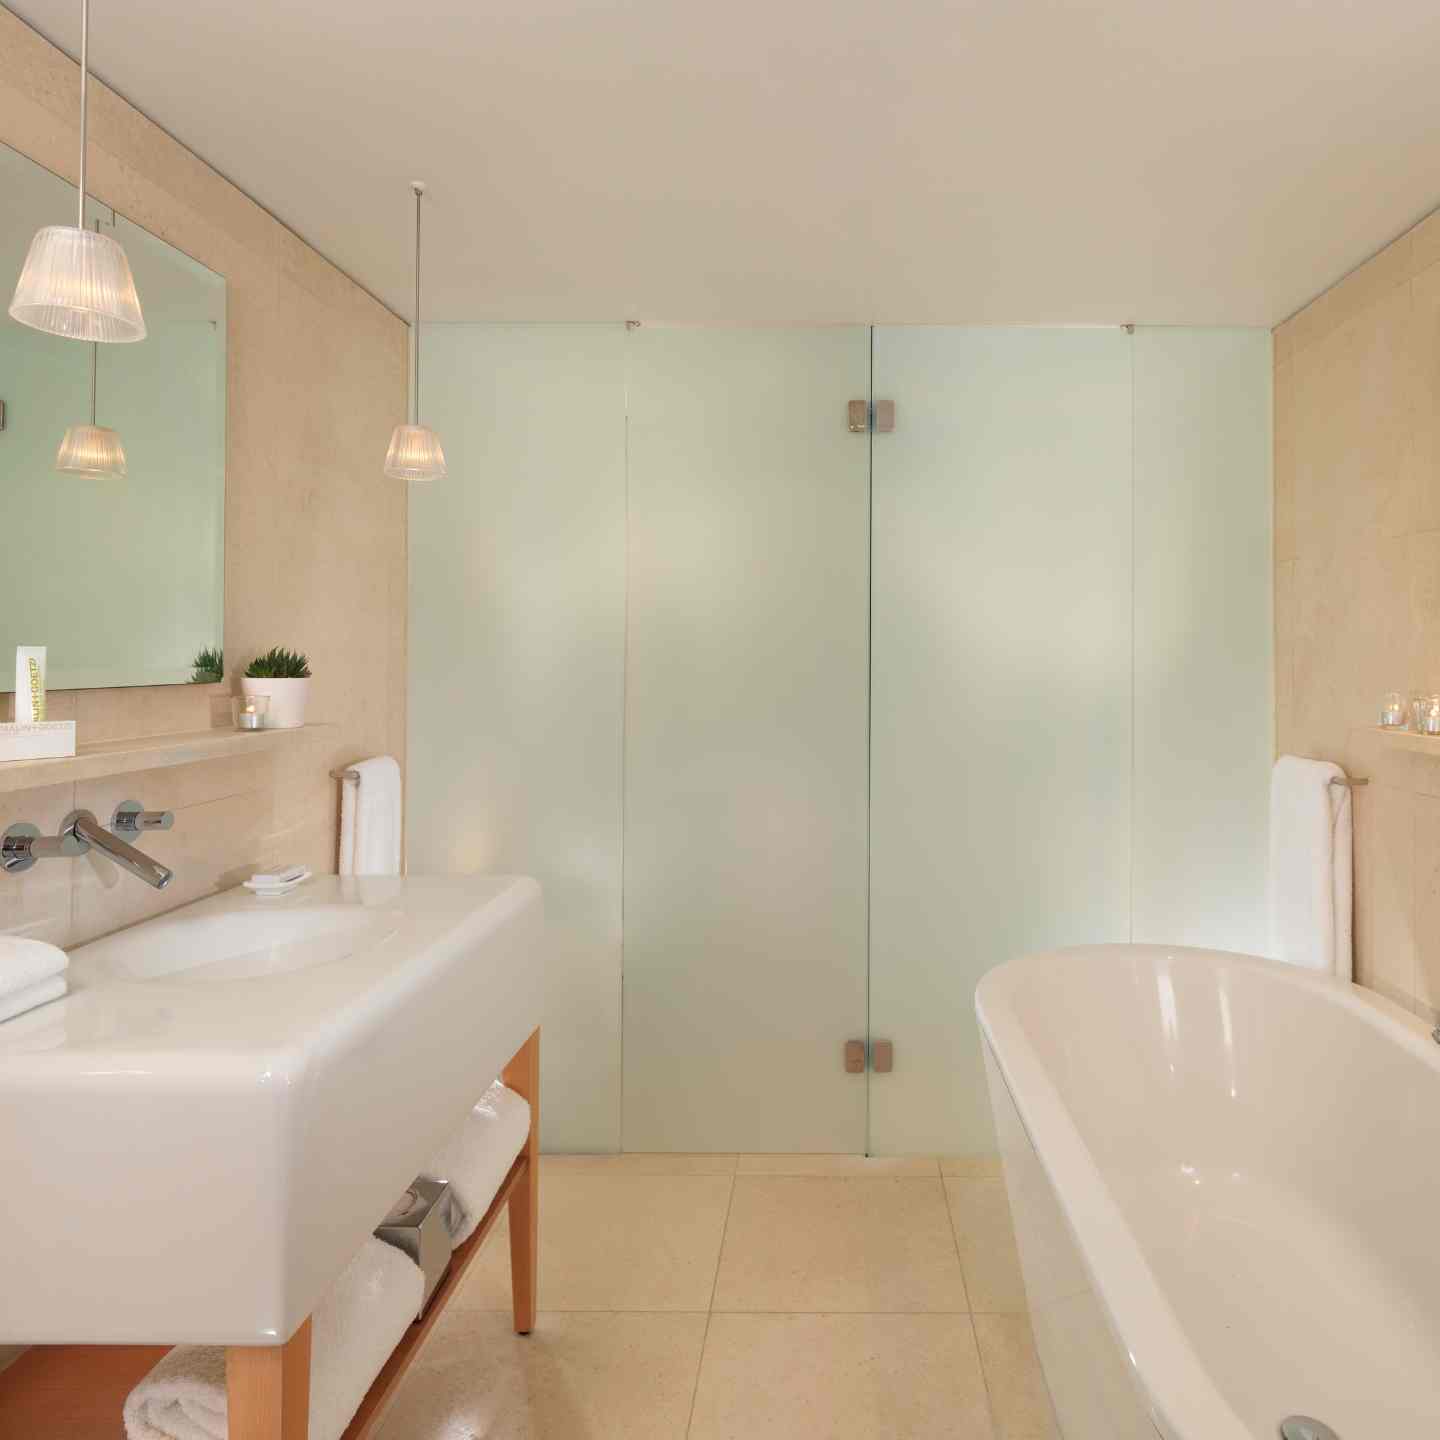 Bathroom with cream walls, white free-standing tub, walk-in shower with glass doors, and large white sink